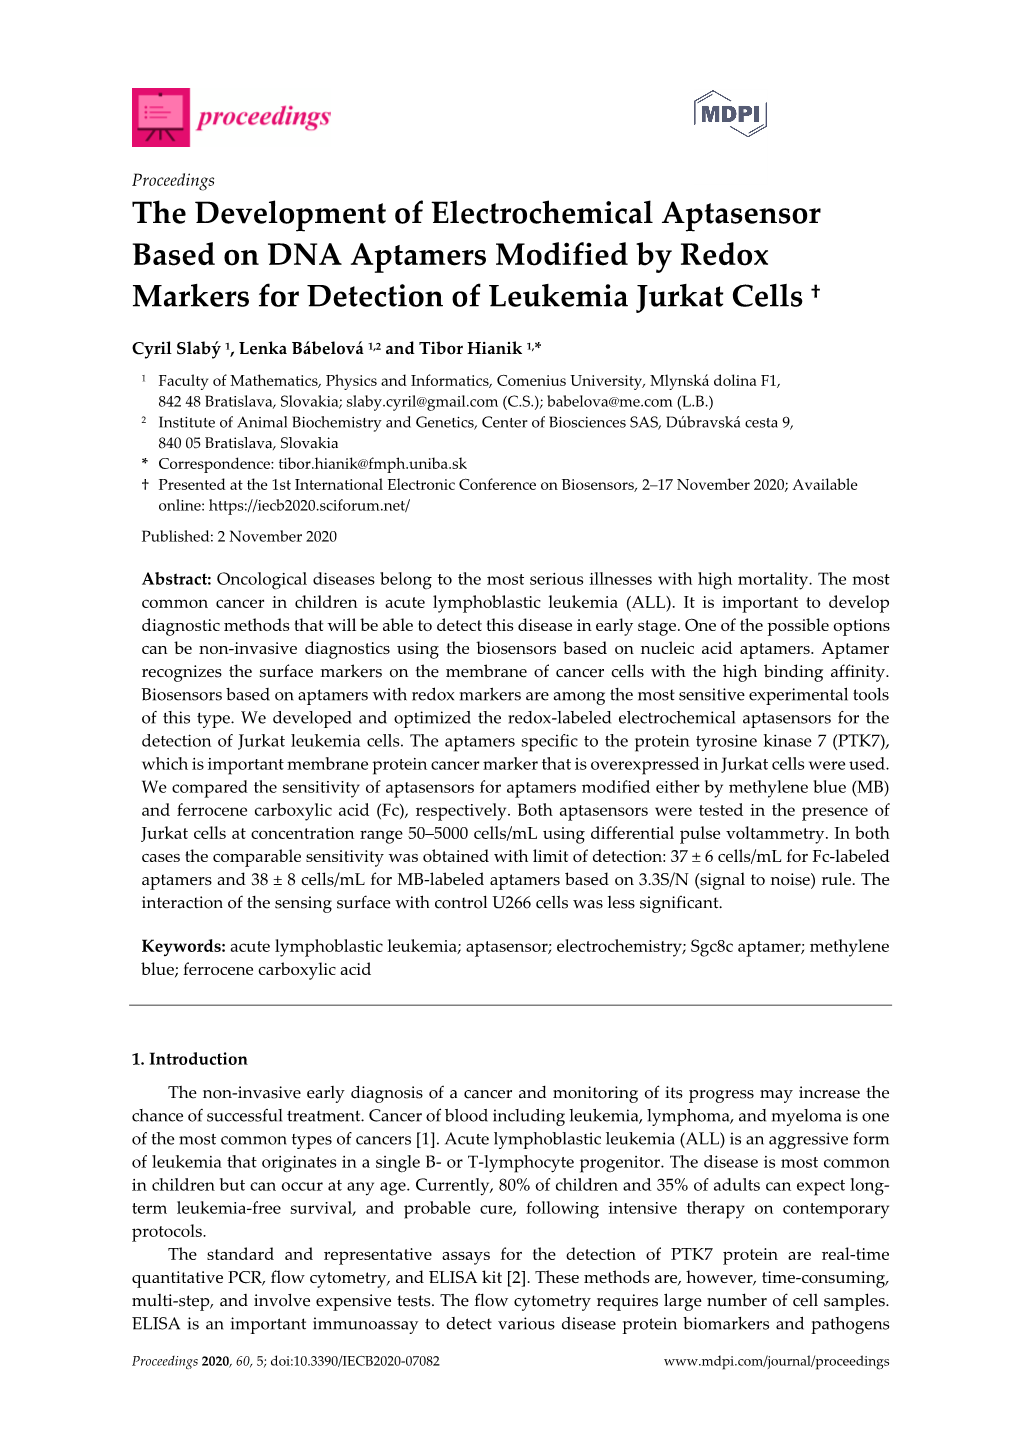 The Development of Electrochemical Aptasensor Based on DNA Aptamers Modified by Redox Markers for Detection of Leukemia Jurkat Cells †